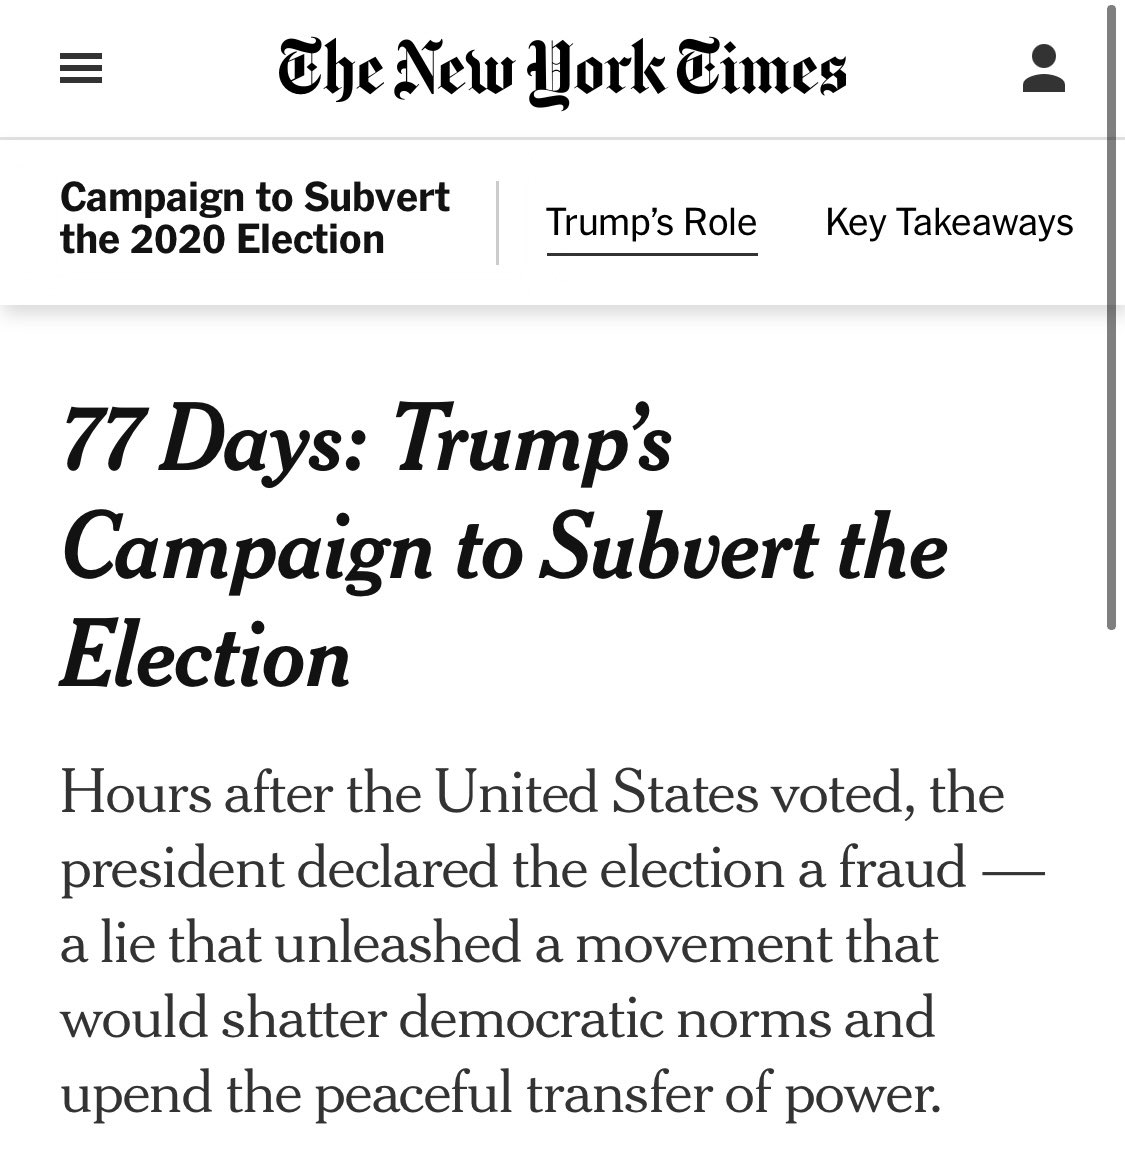 Last night the New York Times placed an article with a number of glaring flaws about the irregularities in the 2020 presidential election.